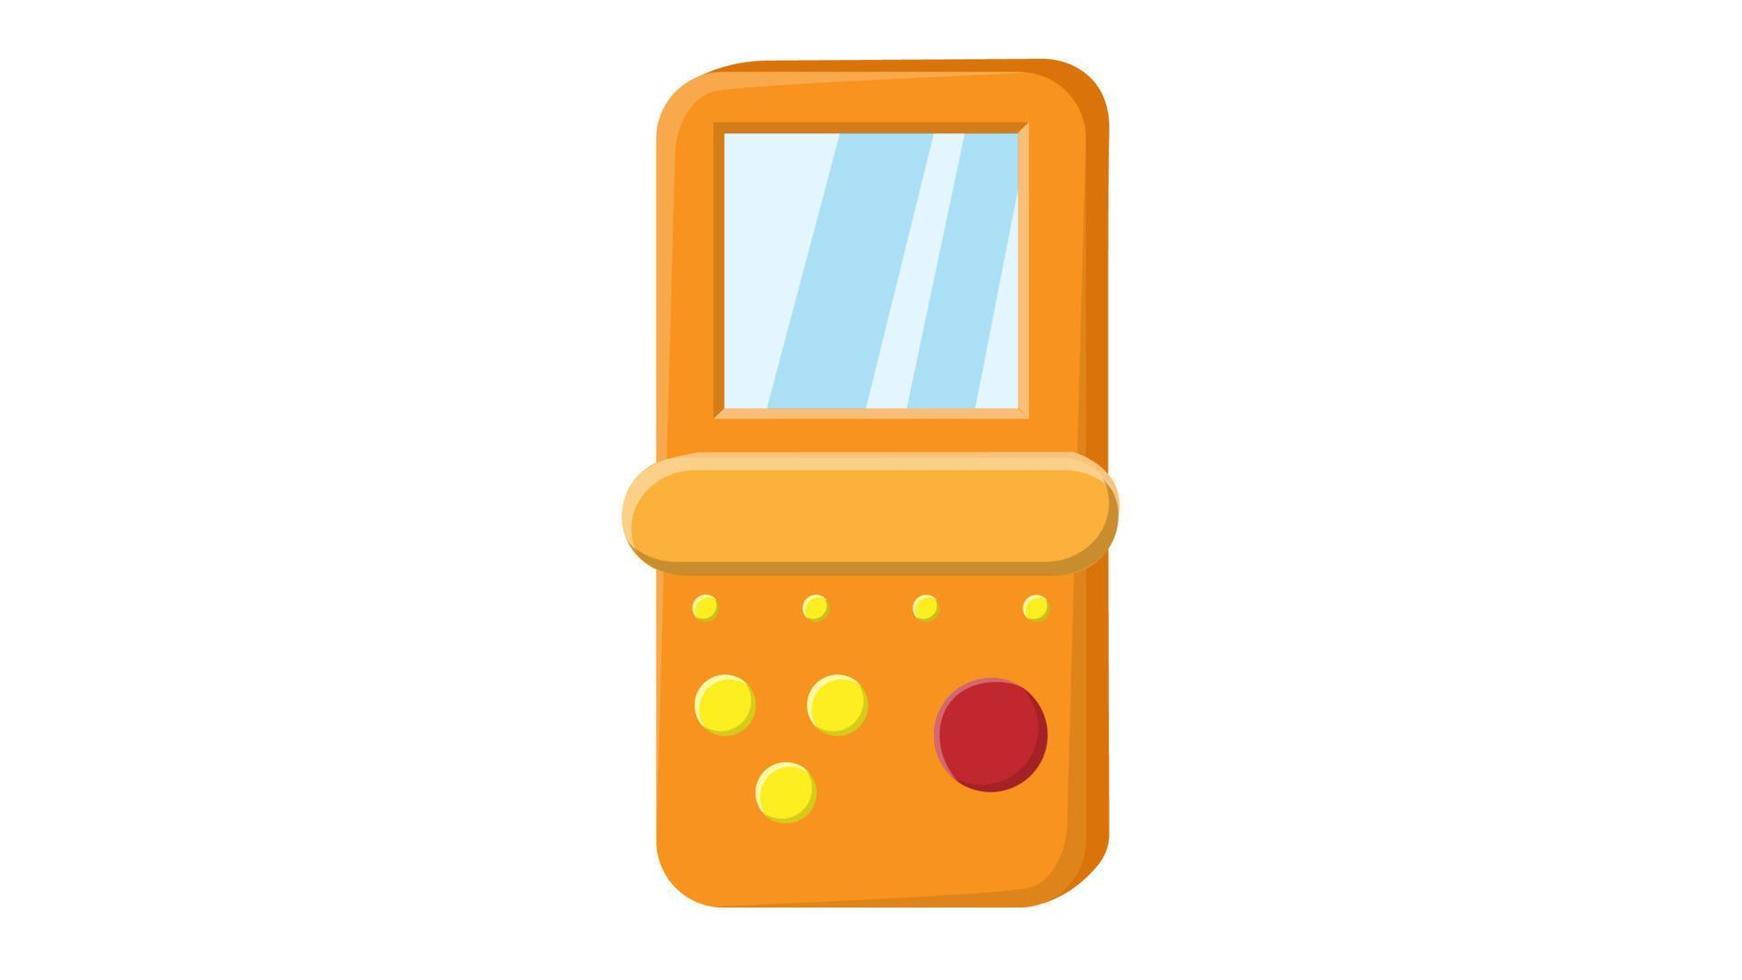 Old retro vintage isometry handheld game console with screen and buttons, tetris from 70s, 80s, 90s. Yellow icon. Vector illustration